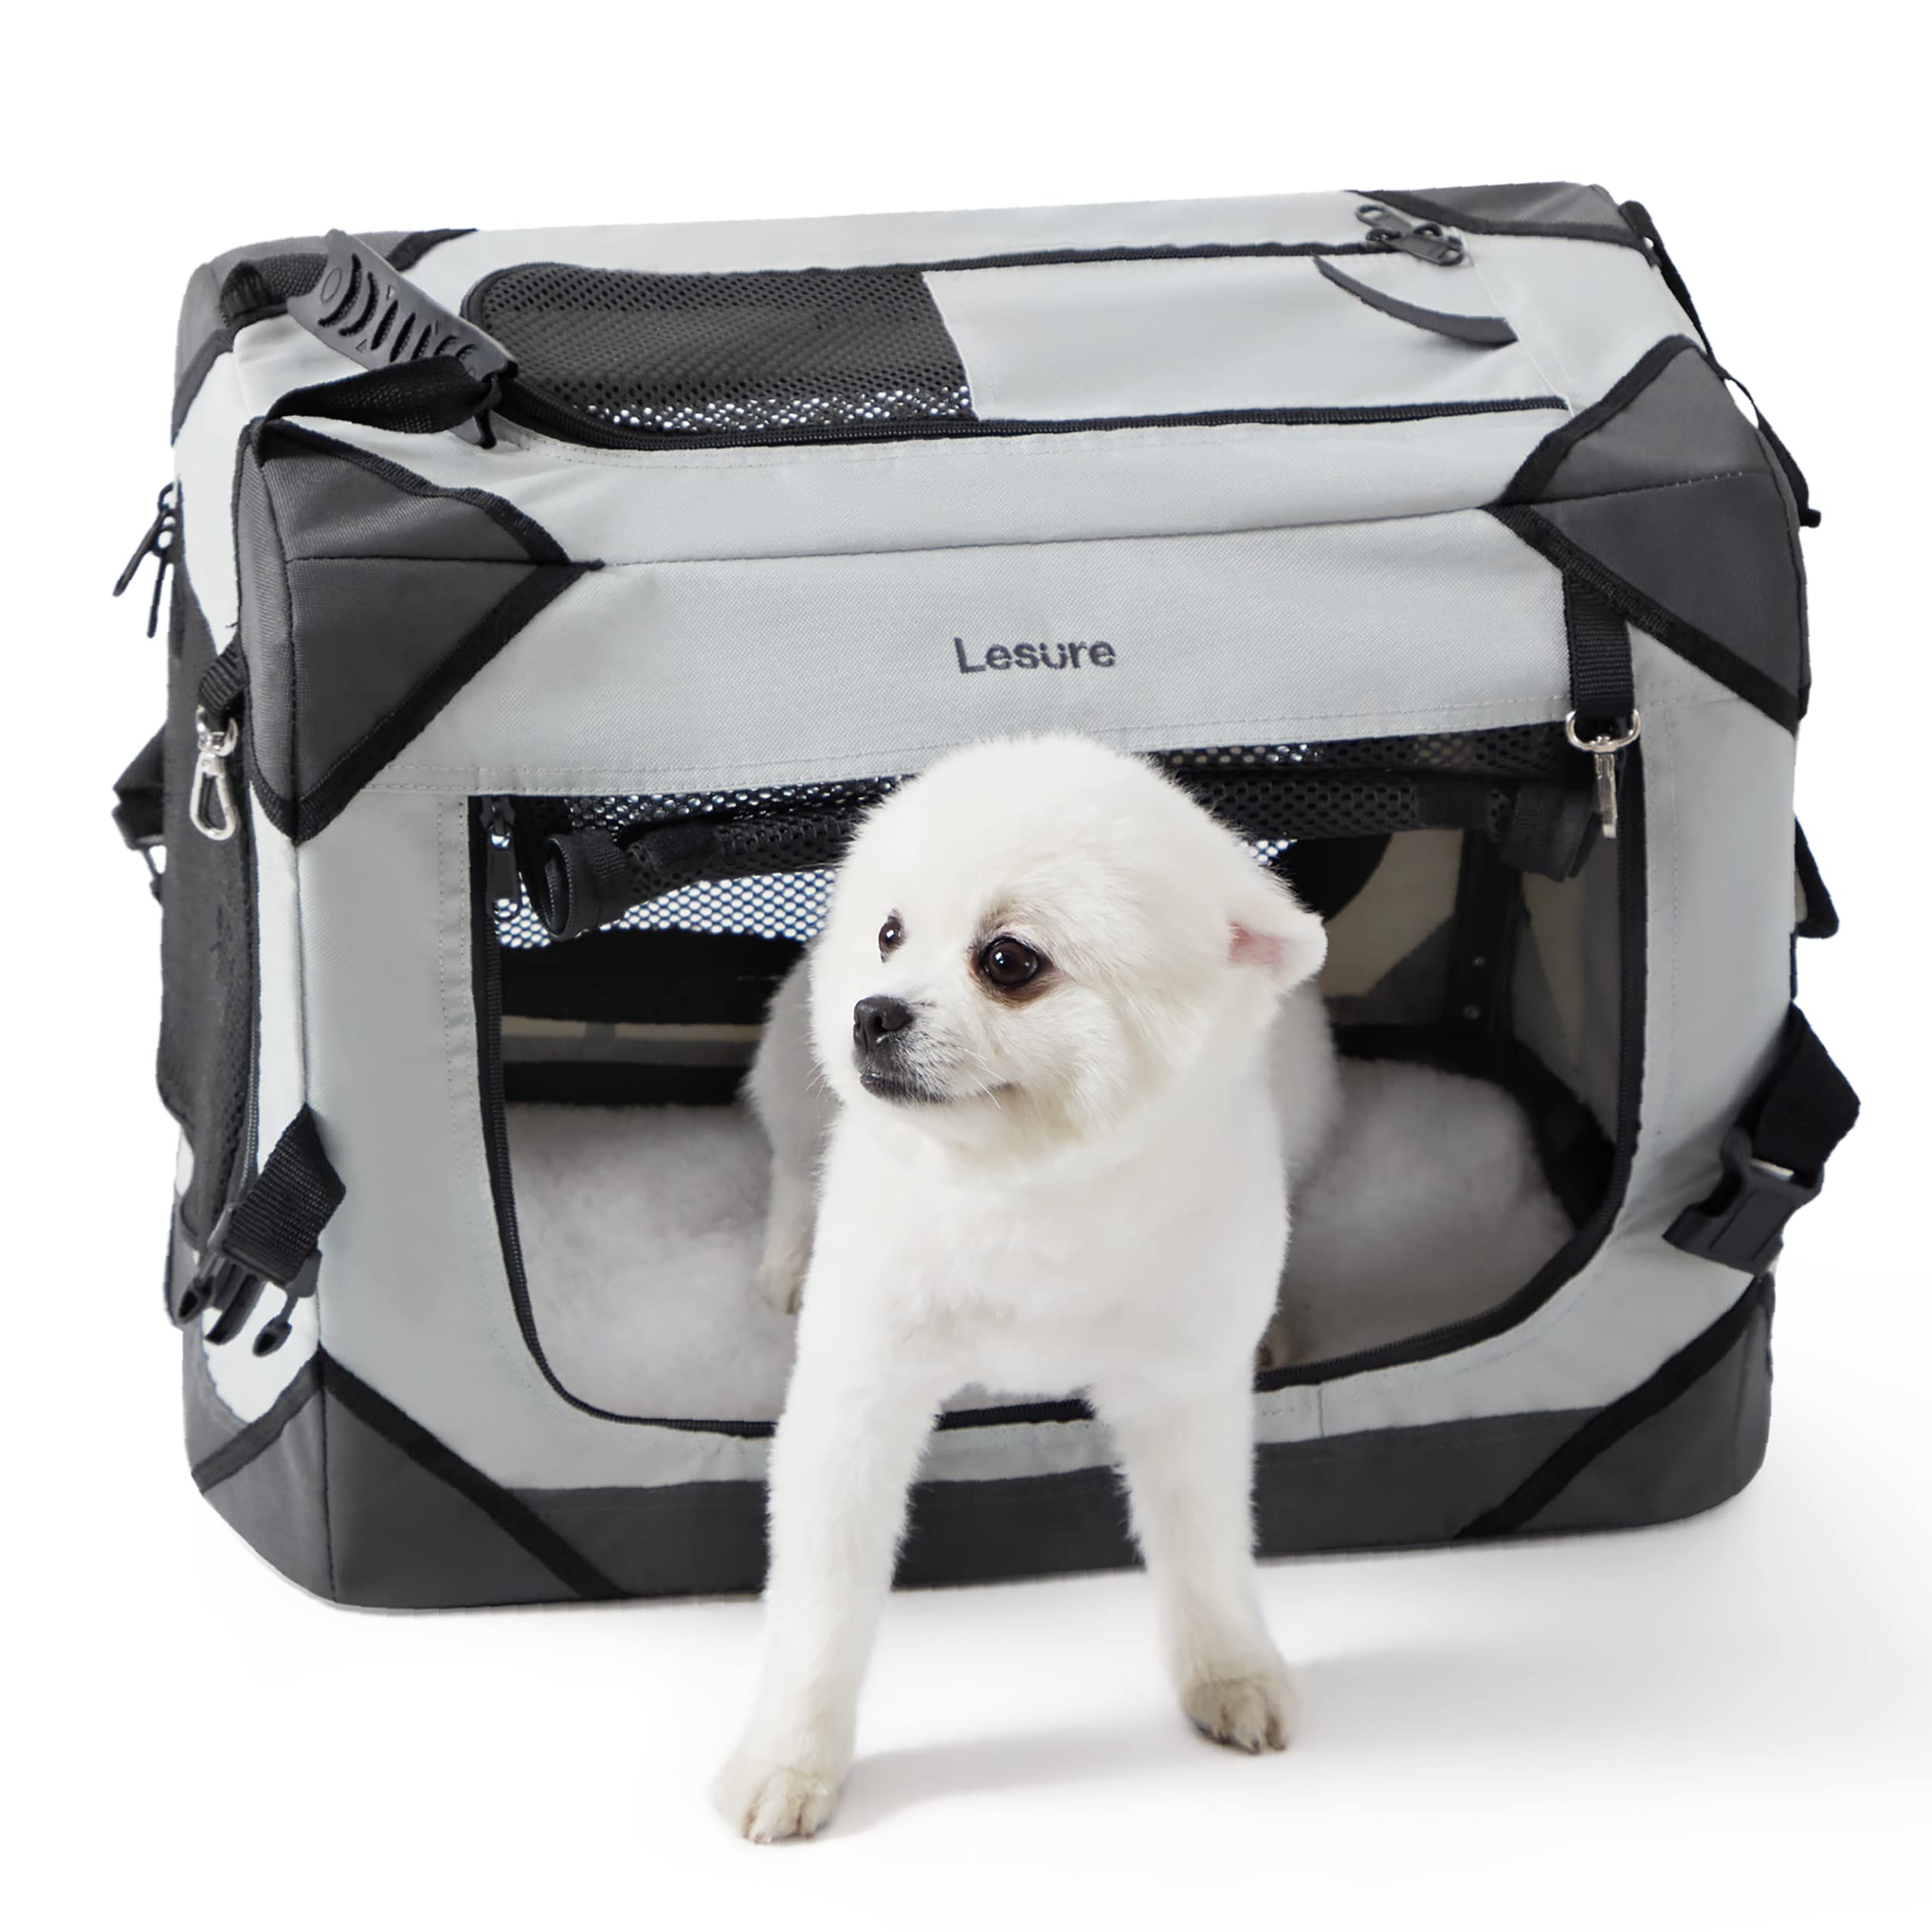 Le sure Lesure collapsible Dog crate - Portable Dog Travel crate Kennel for Extra Small Dog 4-Door Pet crate with Durable Mesh Windows I